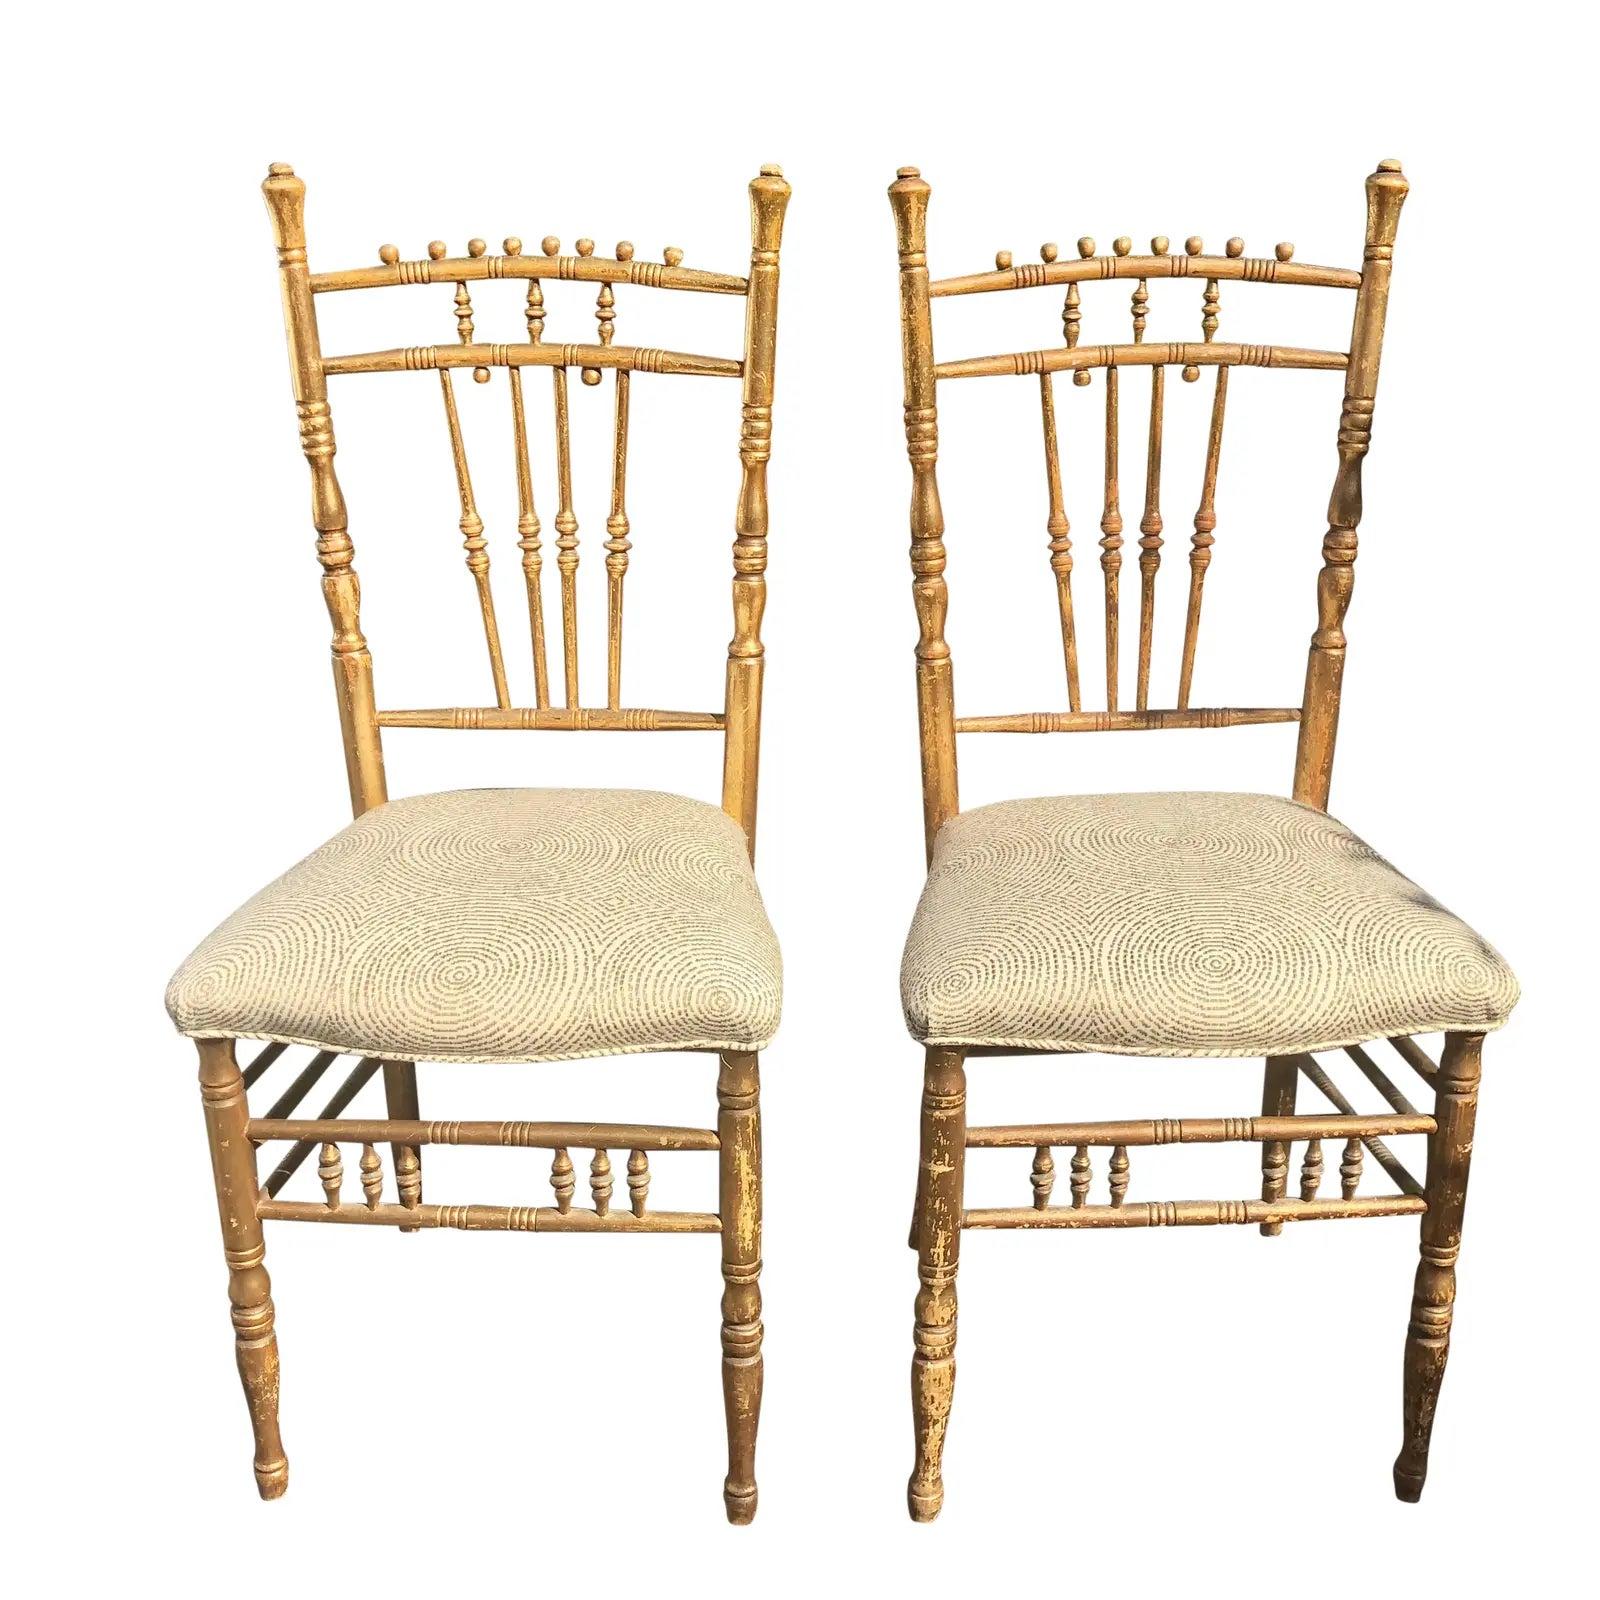 Pair of Antique Regency Style Side Chairs, Late 19th Century For Sale 2